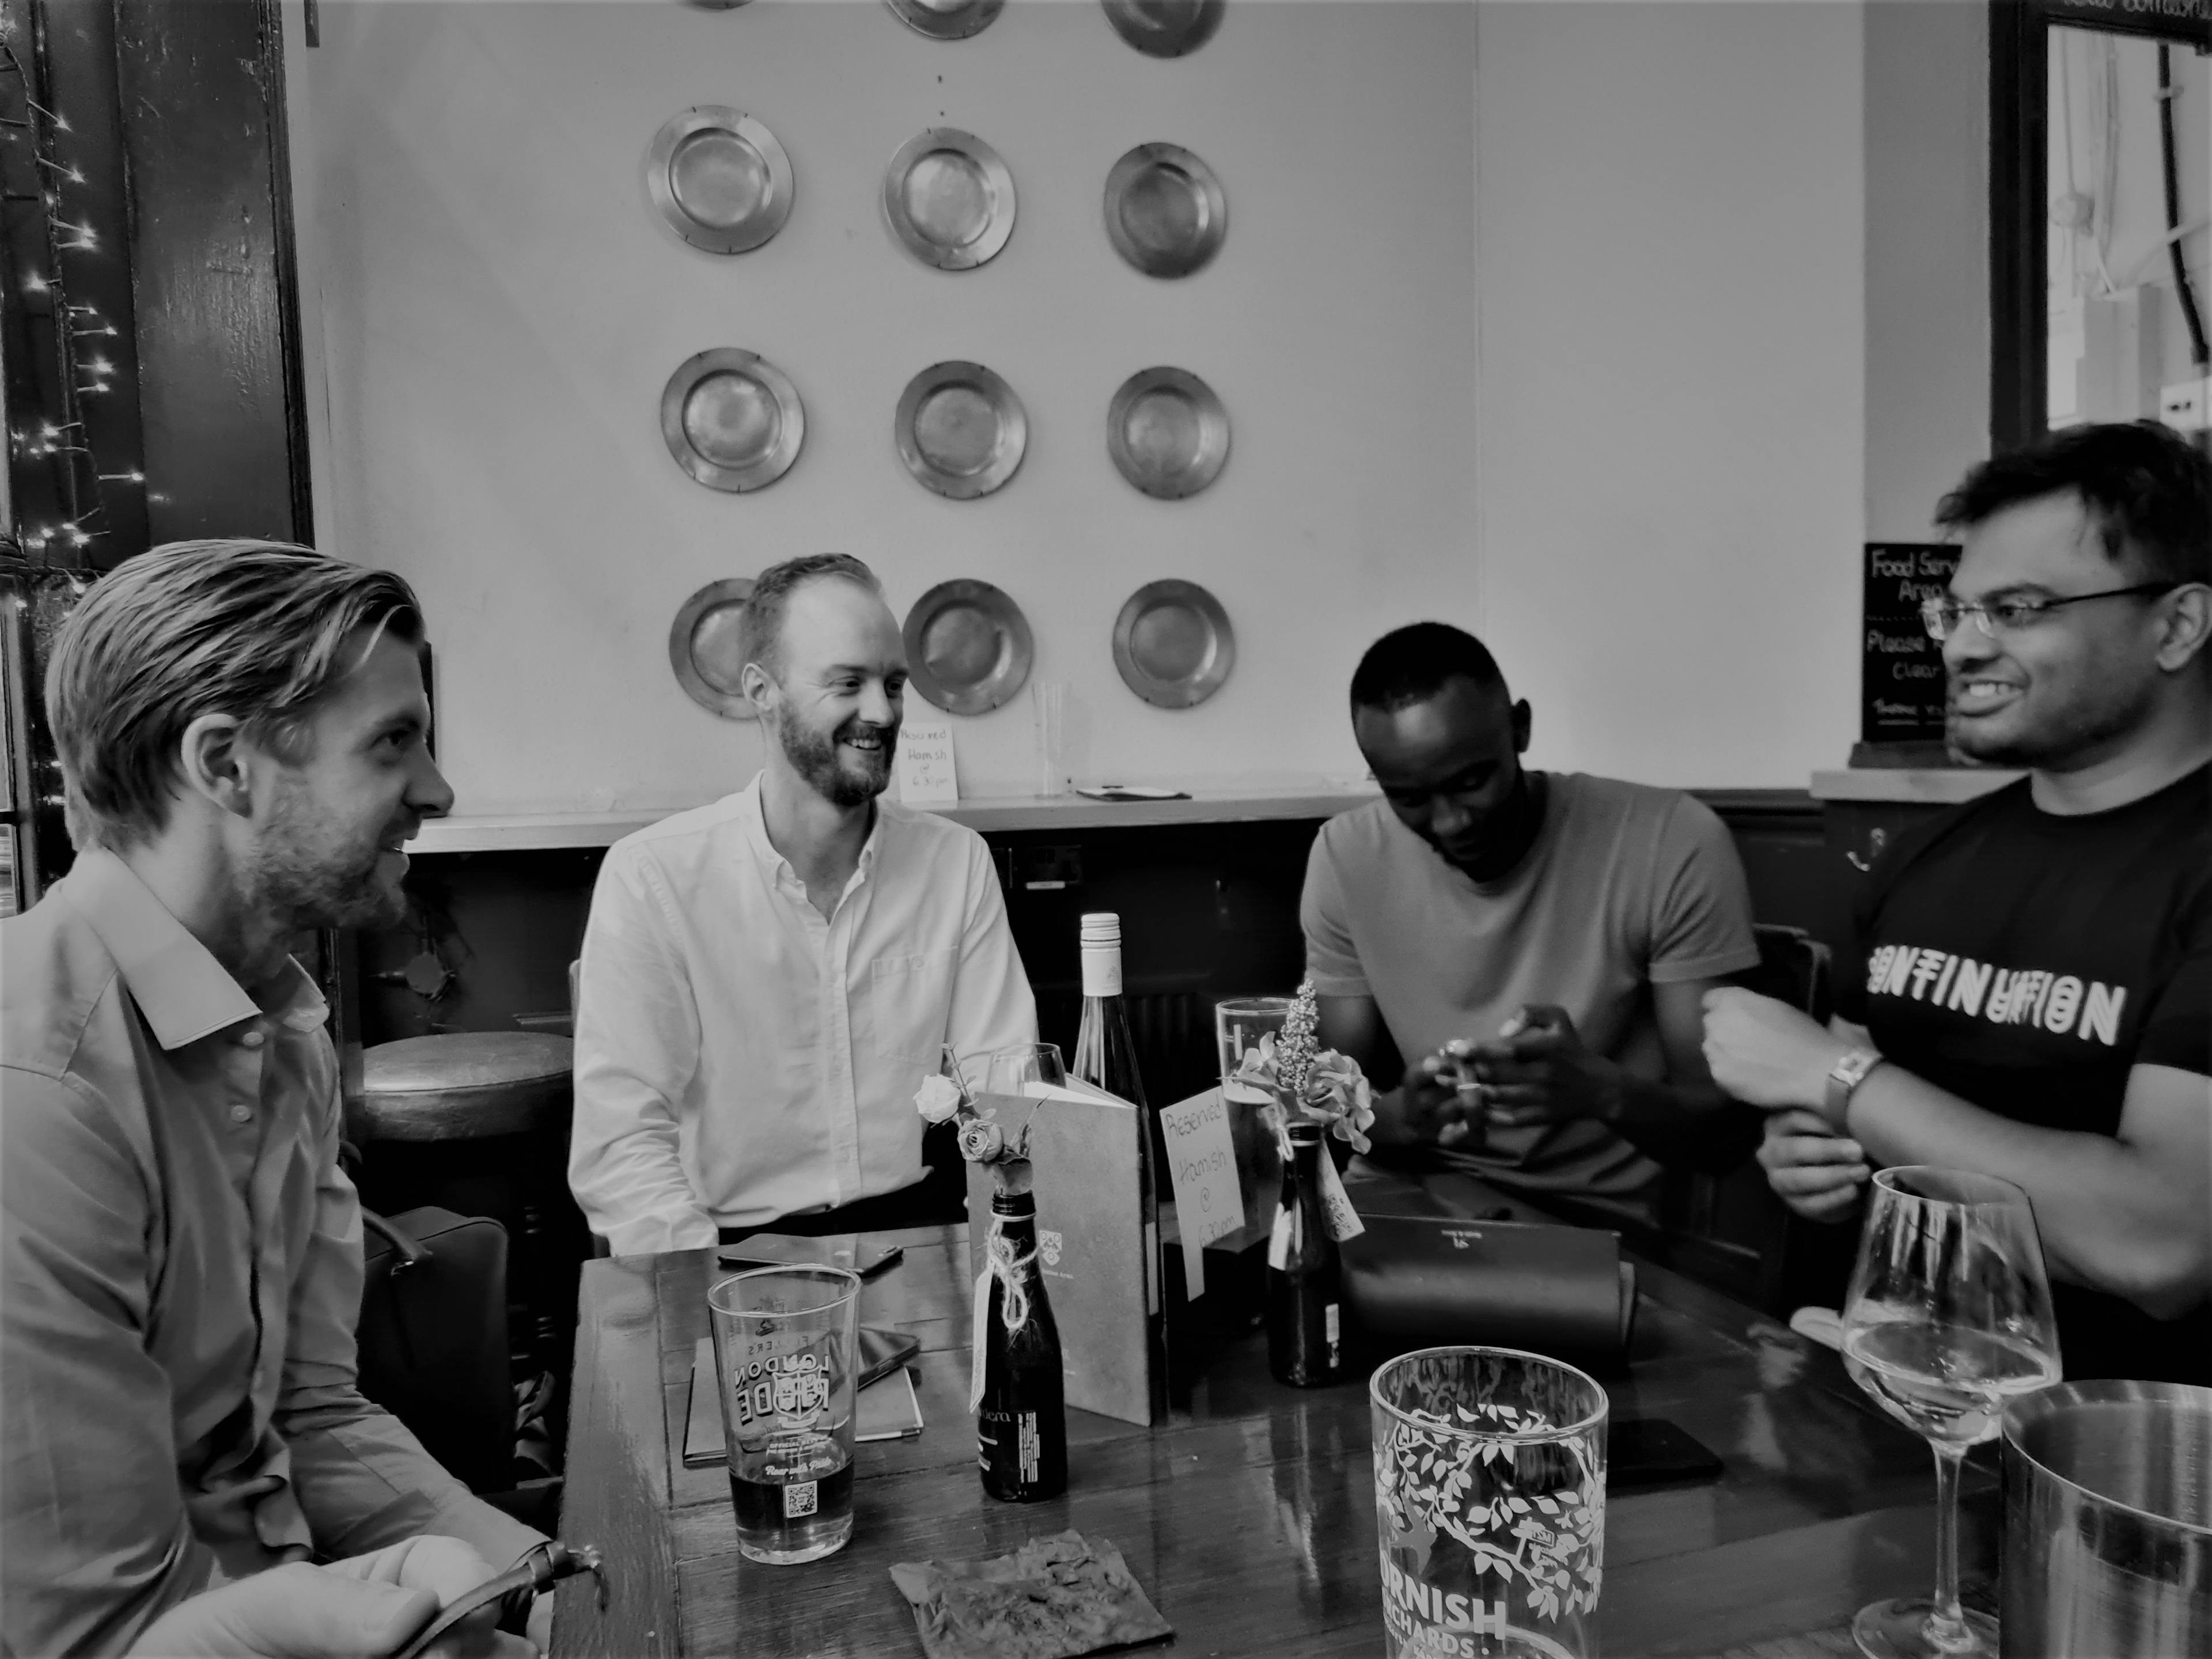 Four men laughing while looking at watches around a table in the pub, with drinks on the table and pewter plates on the white wall at the back.